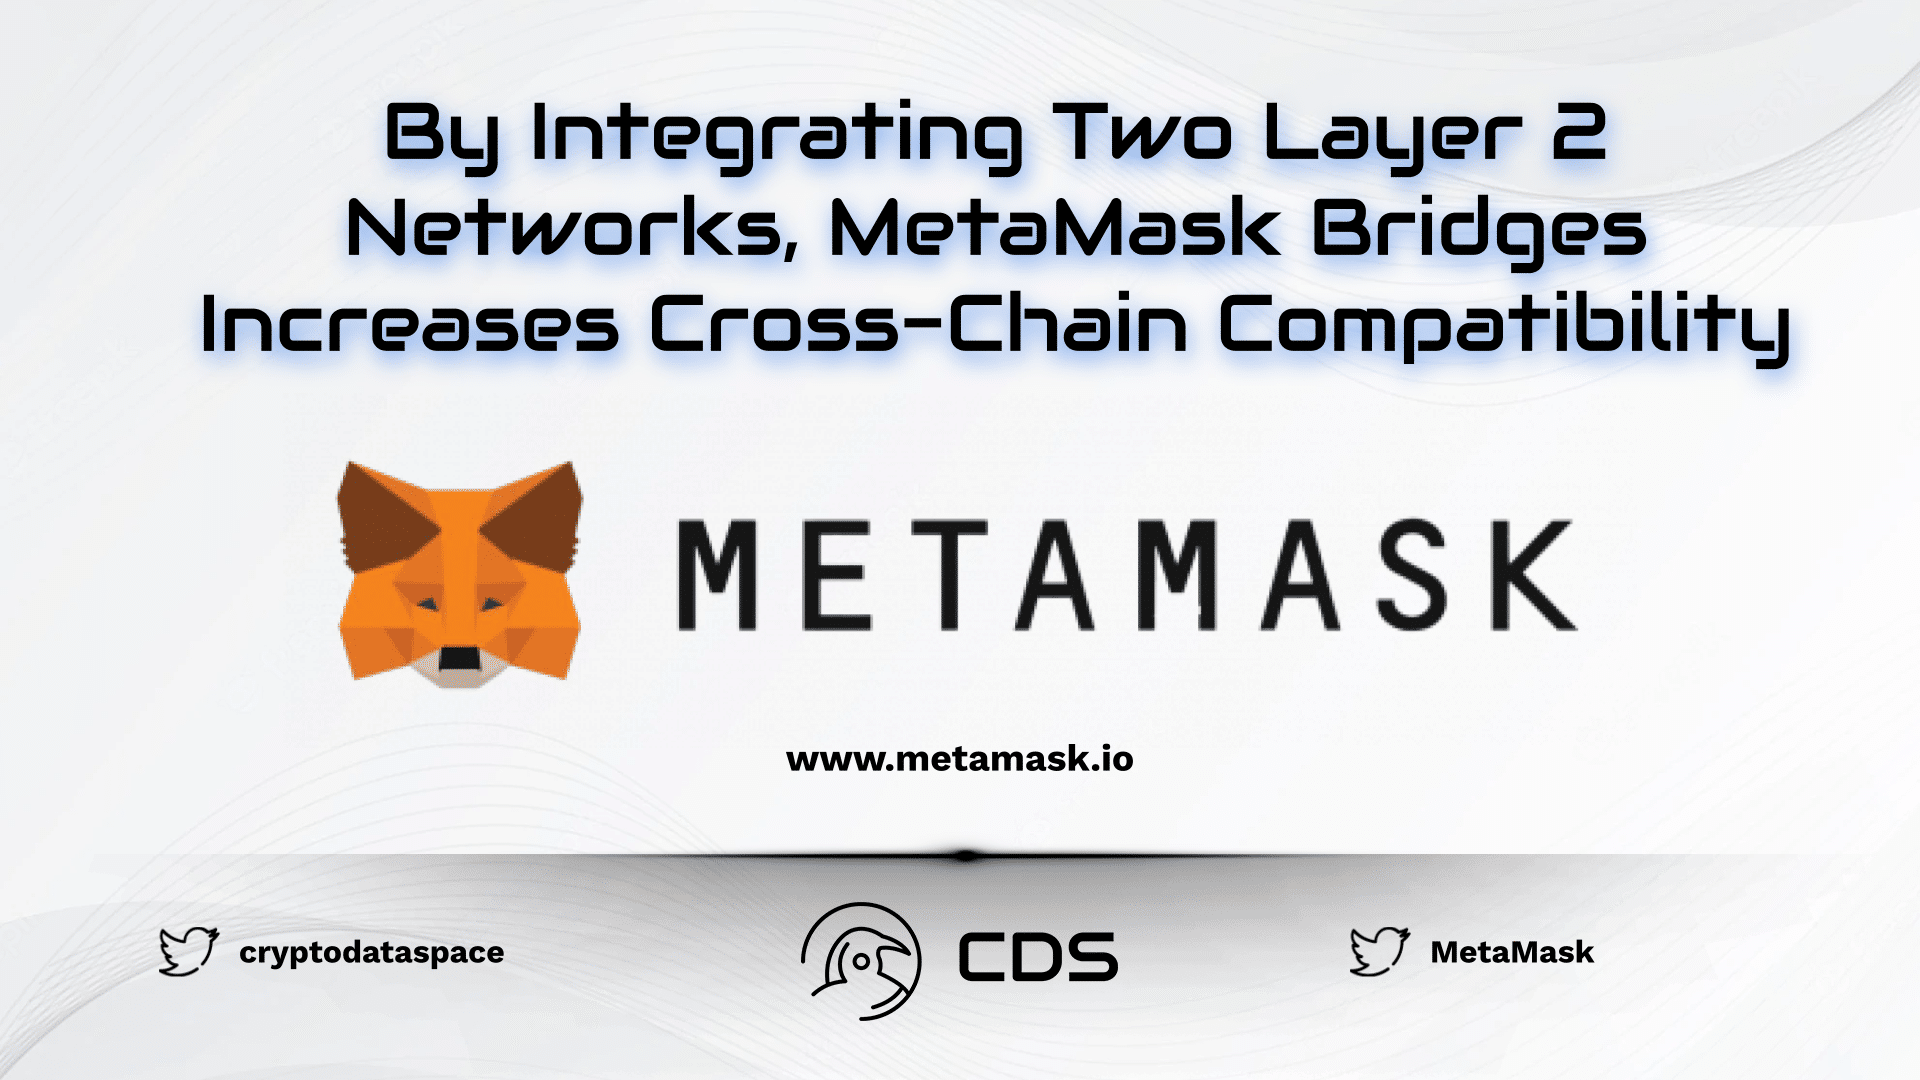 By Integrating Two Layer 2 Networks, MetaMask Bridges Increases Cross-Chain Compatibility